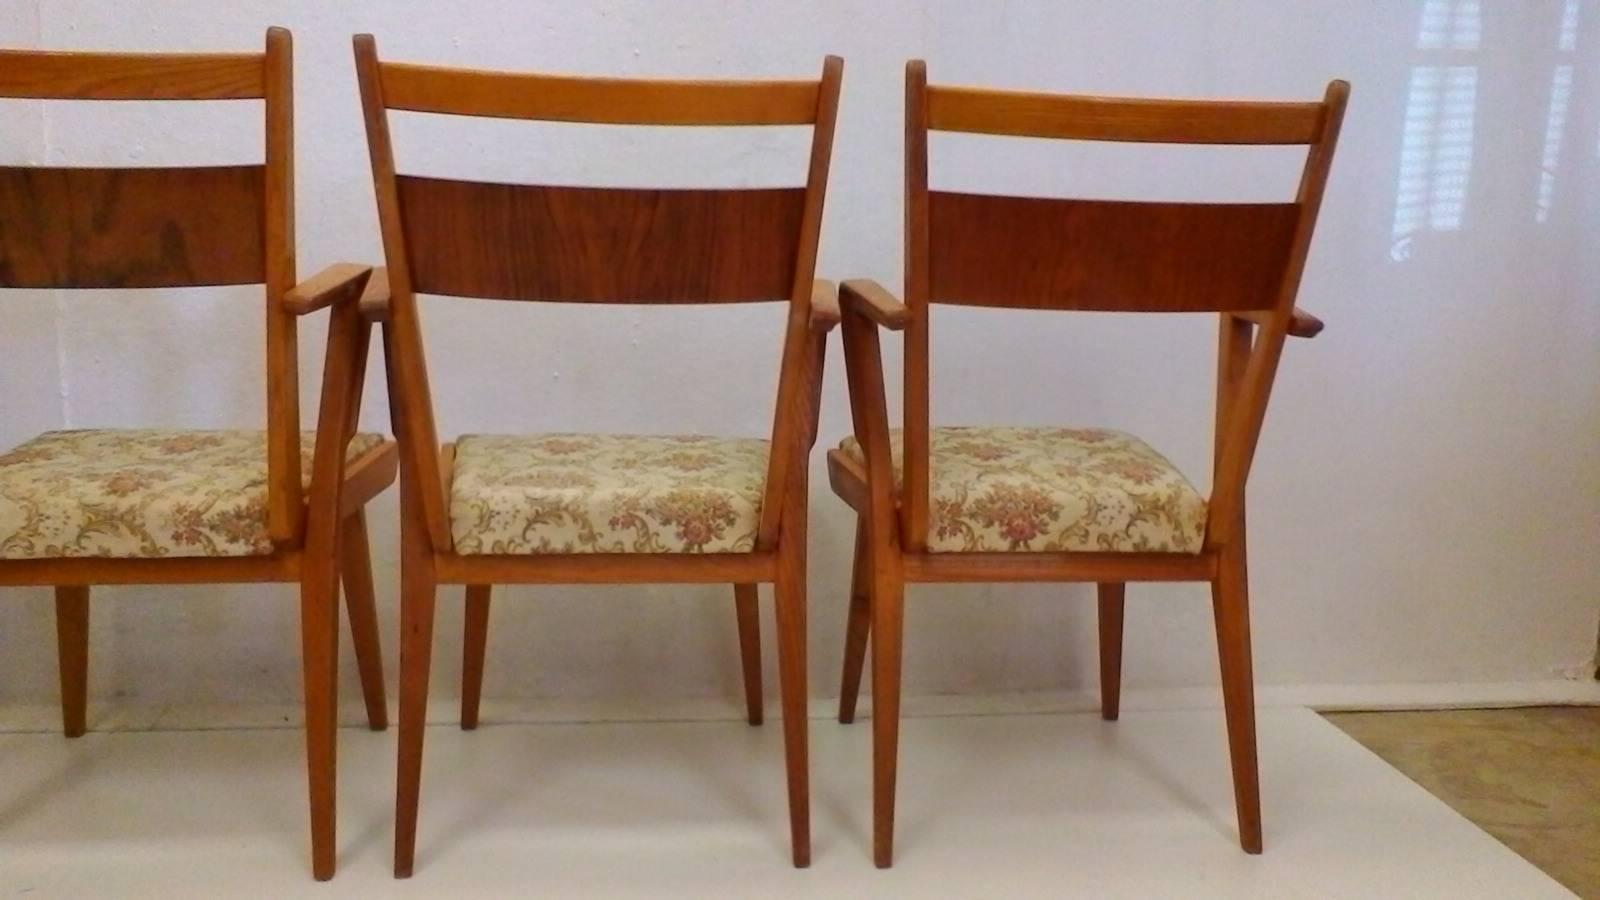 Ash Set of Four Wooden Chairs JI-350 with New Upholstery, 1965 For Sale